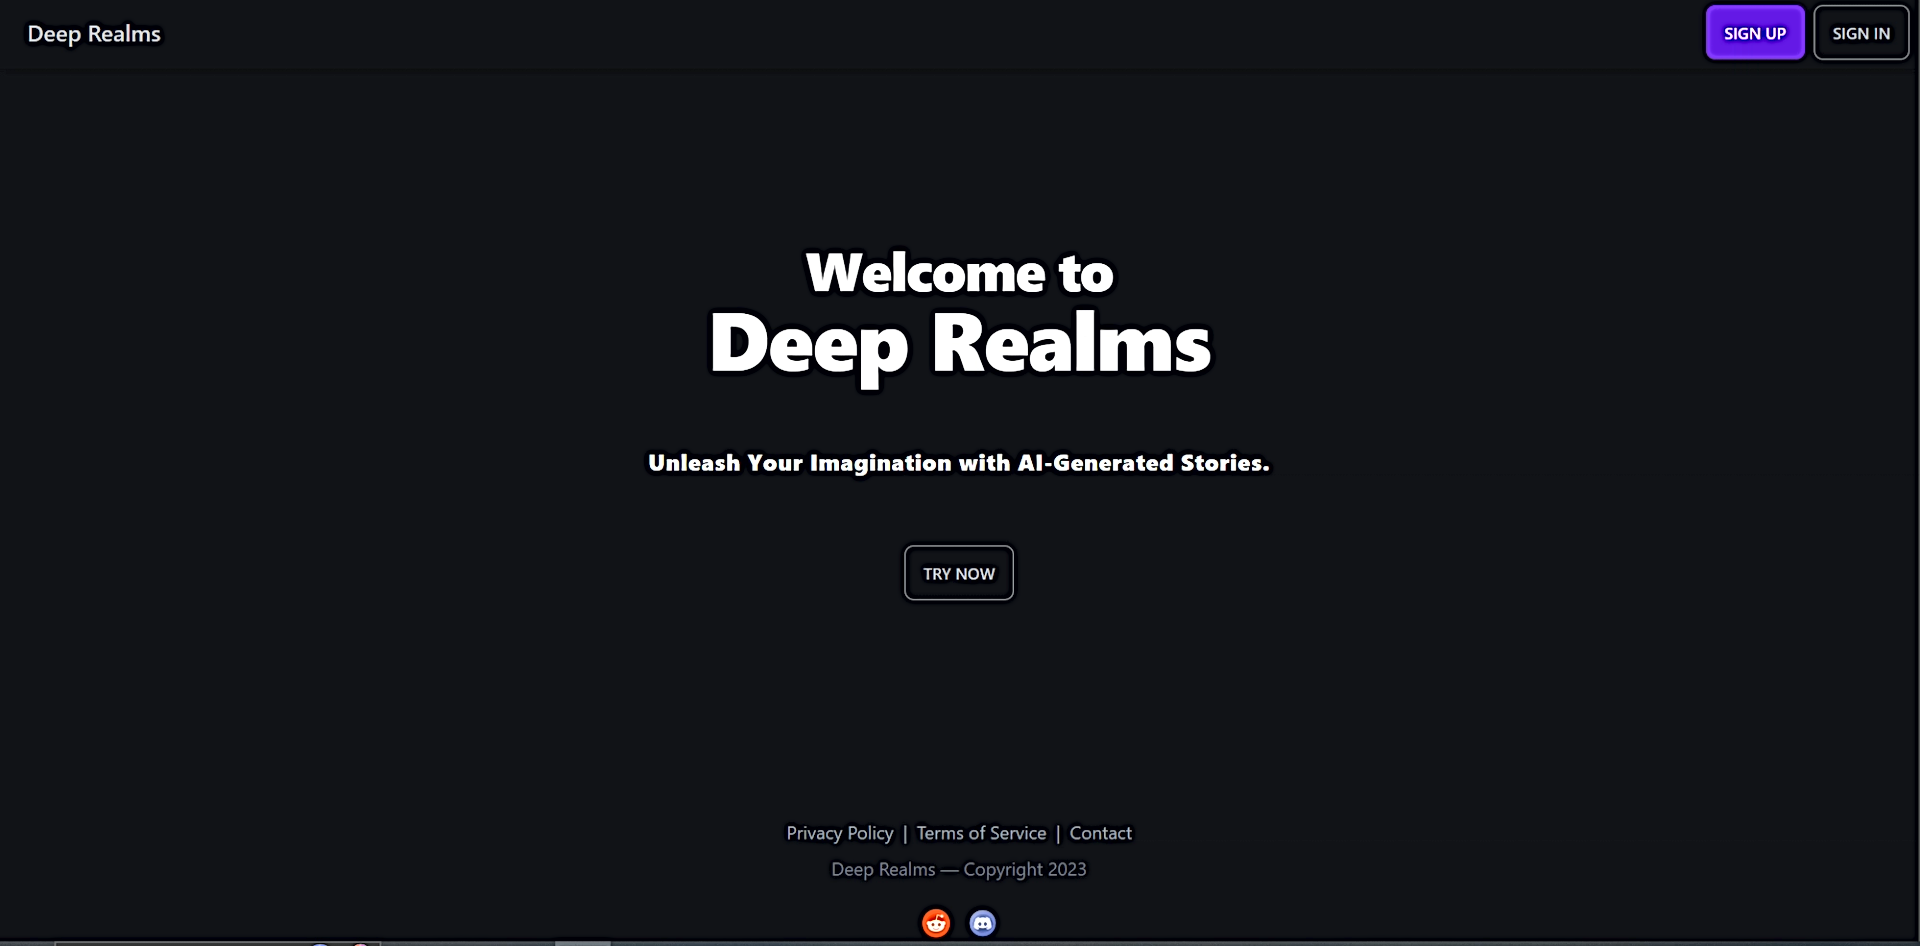 Deep Realms featured